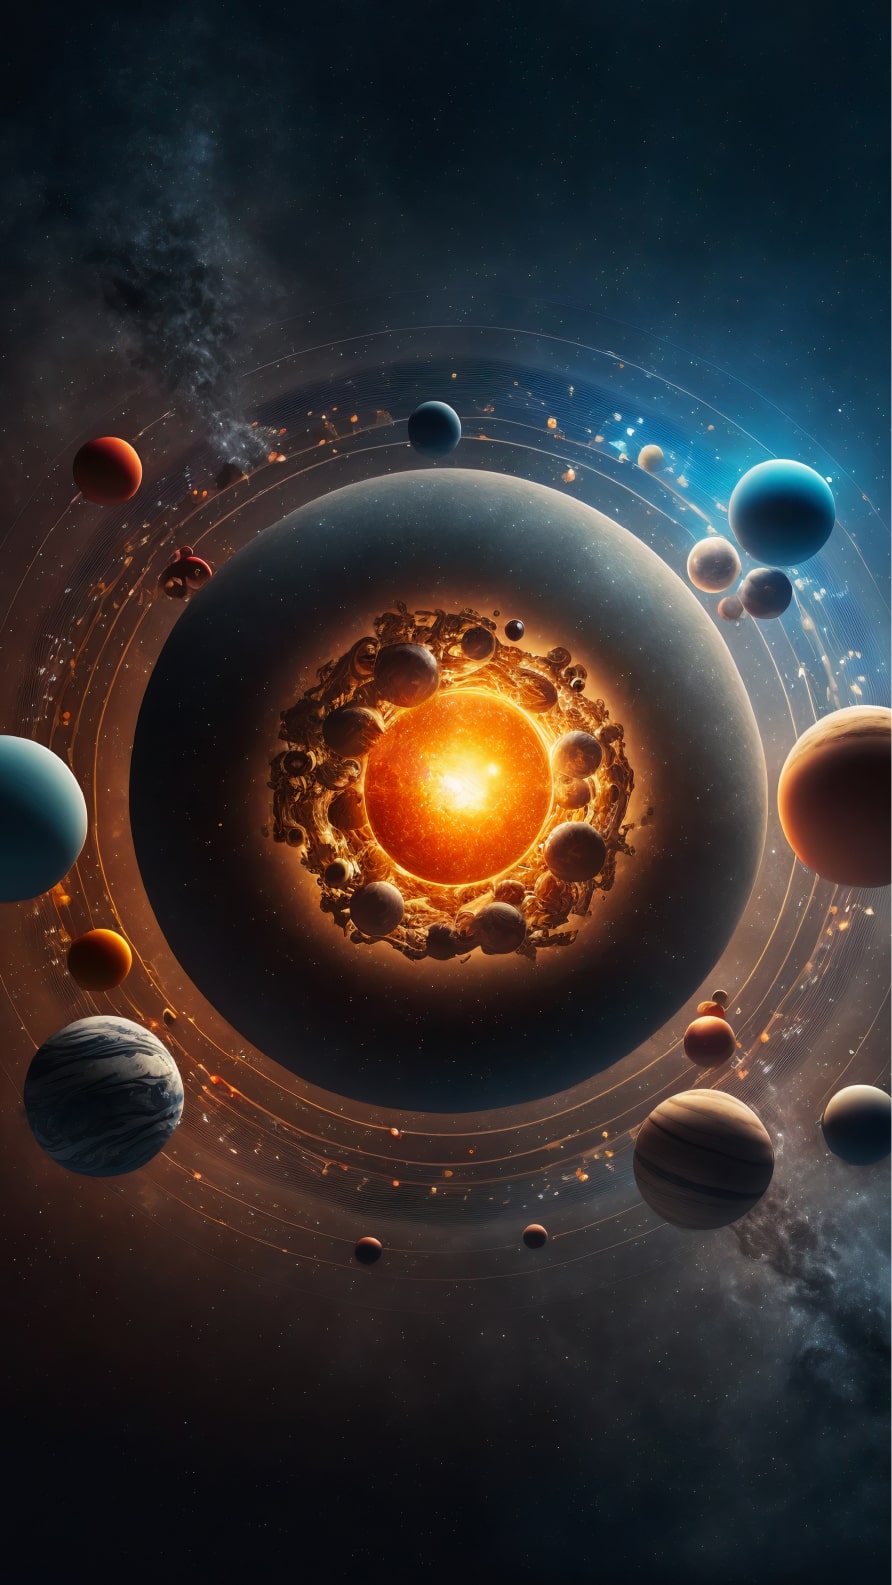 iPhone wallpapers featuring planets